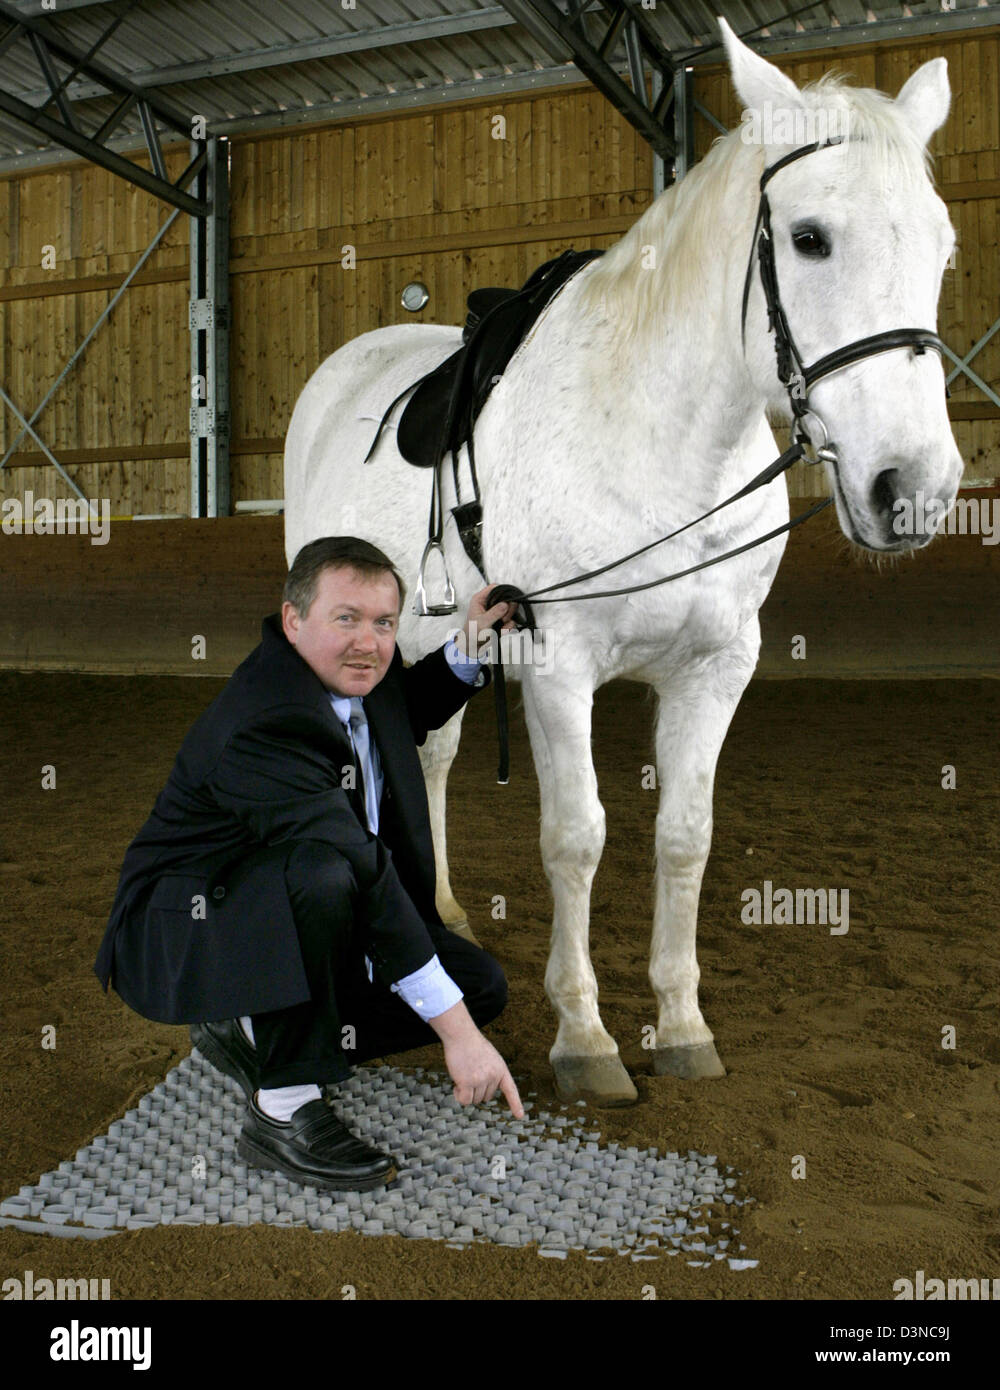 The head of Otto sport- and horse riding fields construction Ltd., Werner Otto, points on a horse mat in the company's headquarter in Altdorf near Nuremberg, Germany, 2 March 2006. 40 years ago Werner Otto began with the construction of tennis courts in Nuremberg and the surrounding area. Today the family business delivers patented special mats for horse riding courts and tournamen Stock Photo